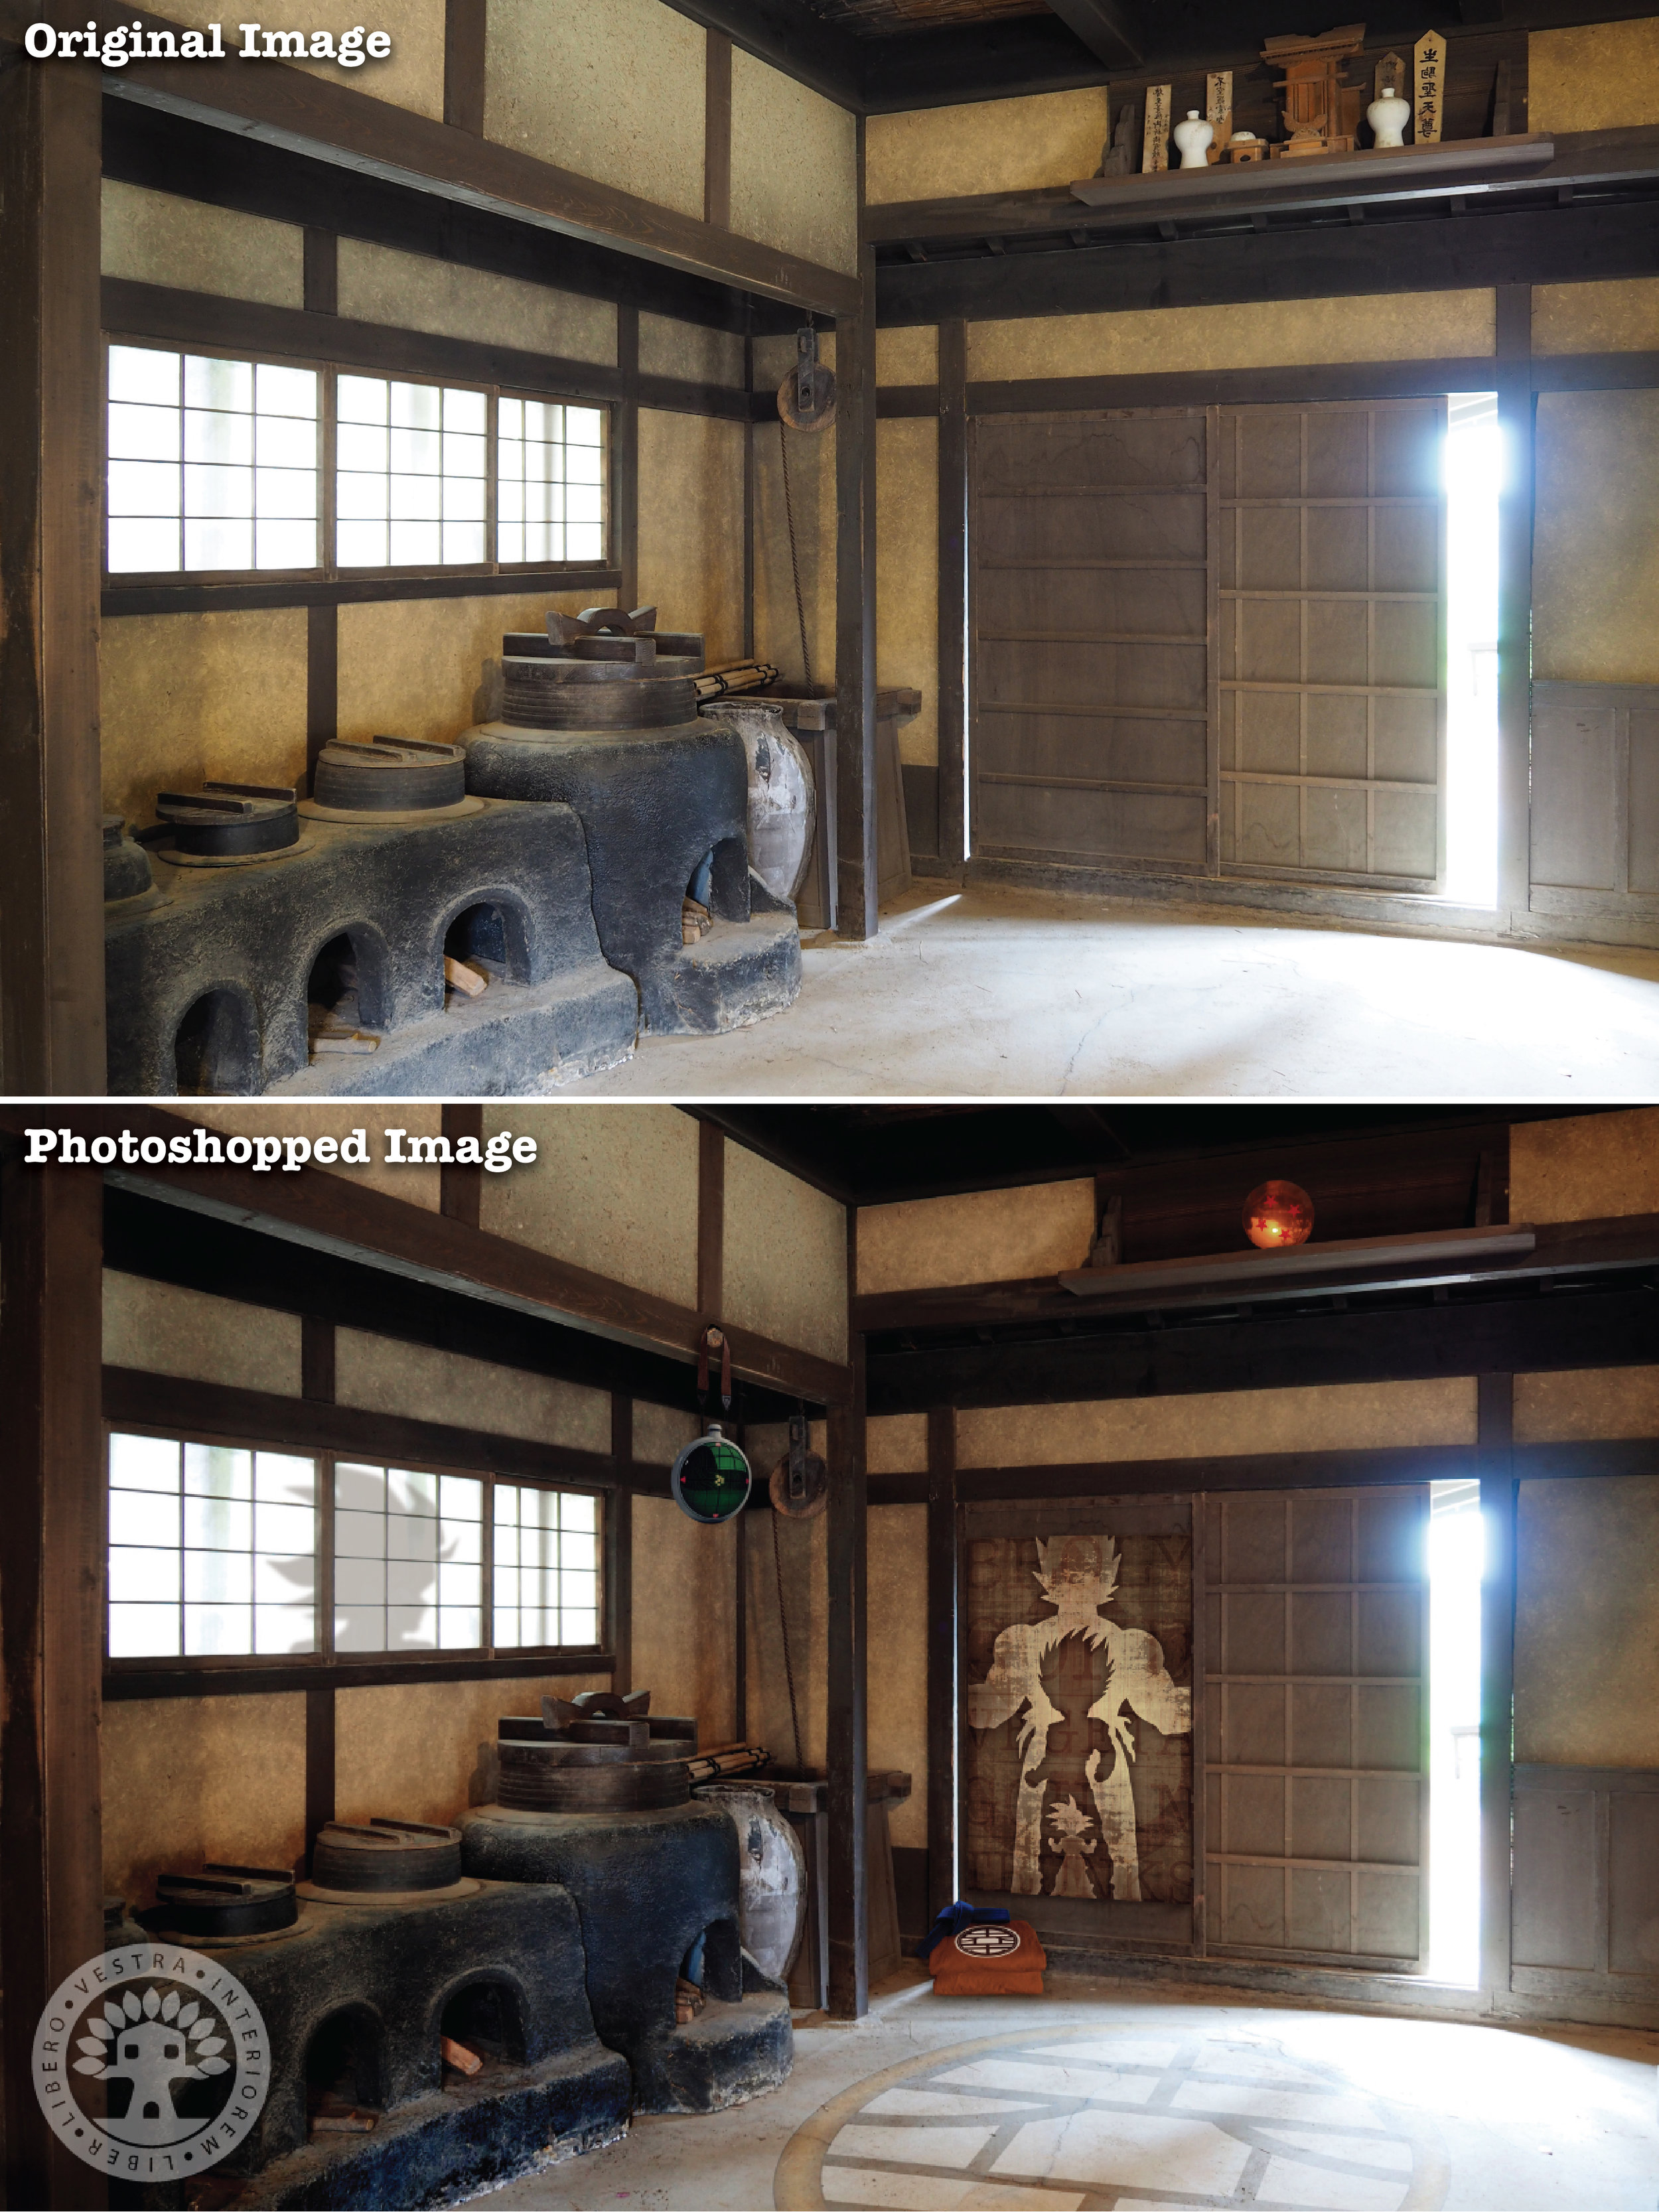 "Goku's Dojo" before and after Photoshop . ~ Corinne Jade, ClubHouse Collective